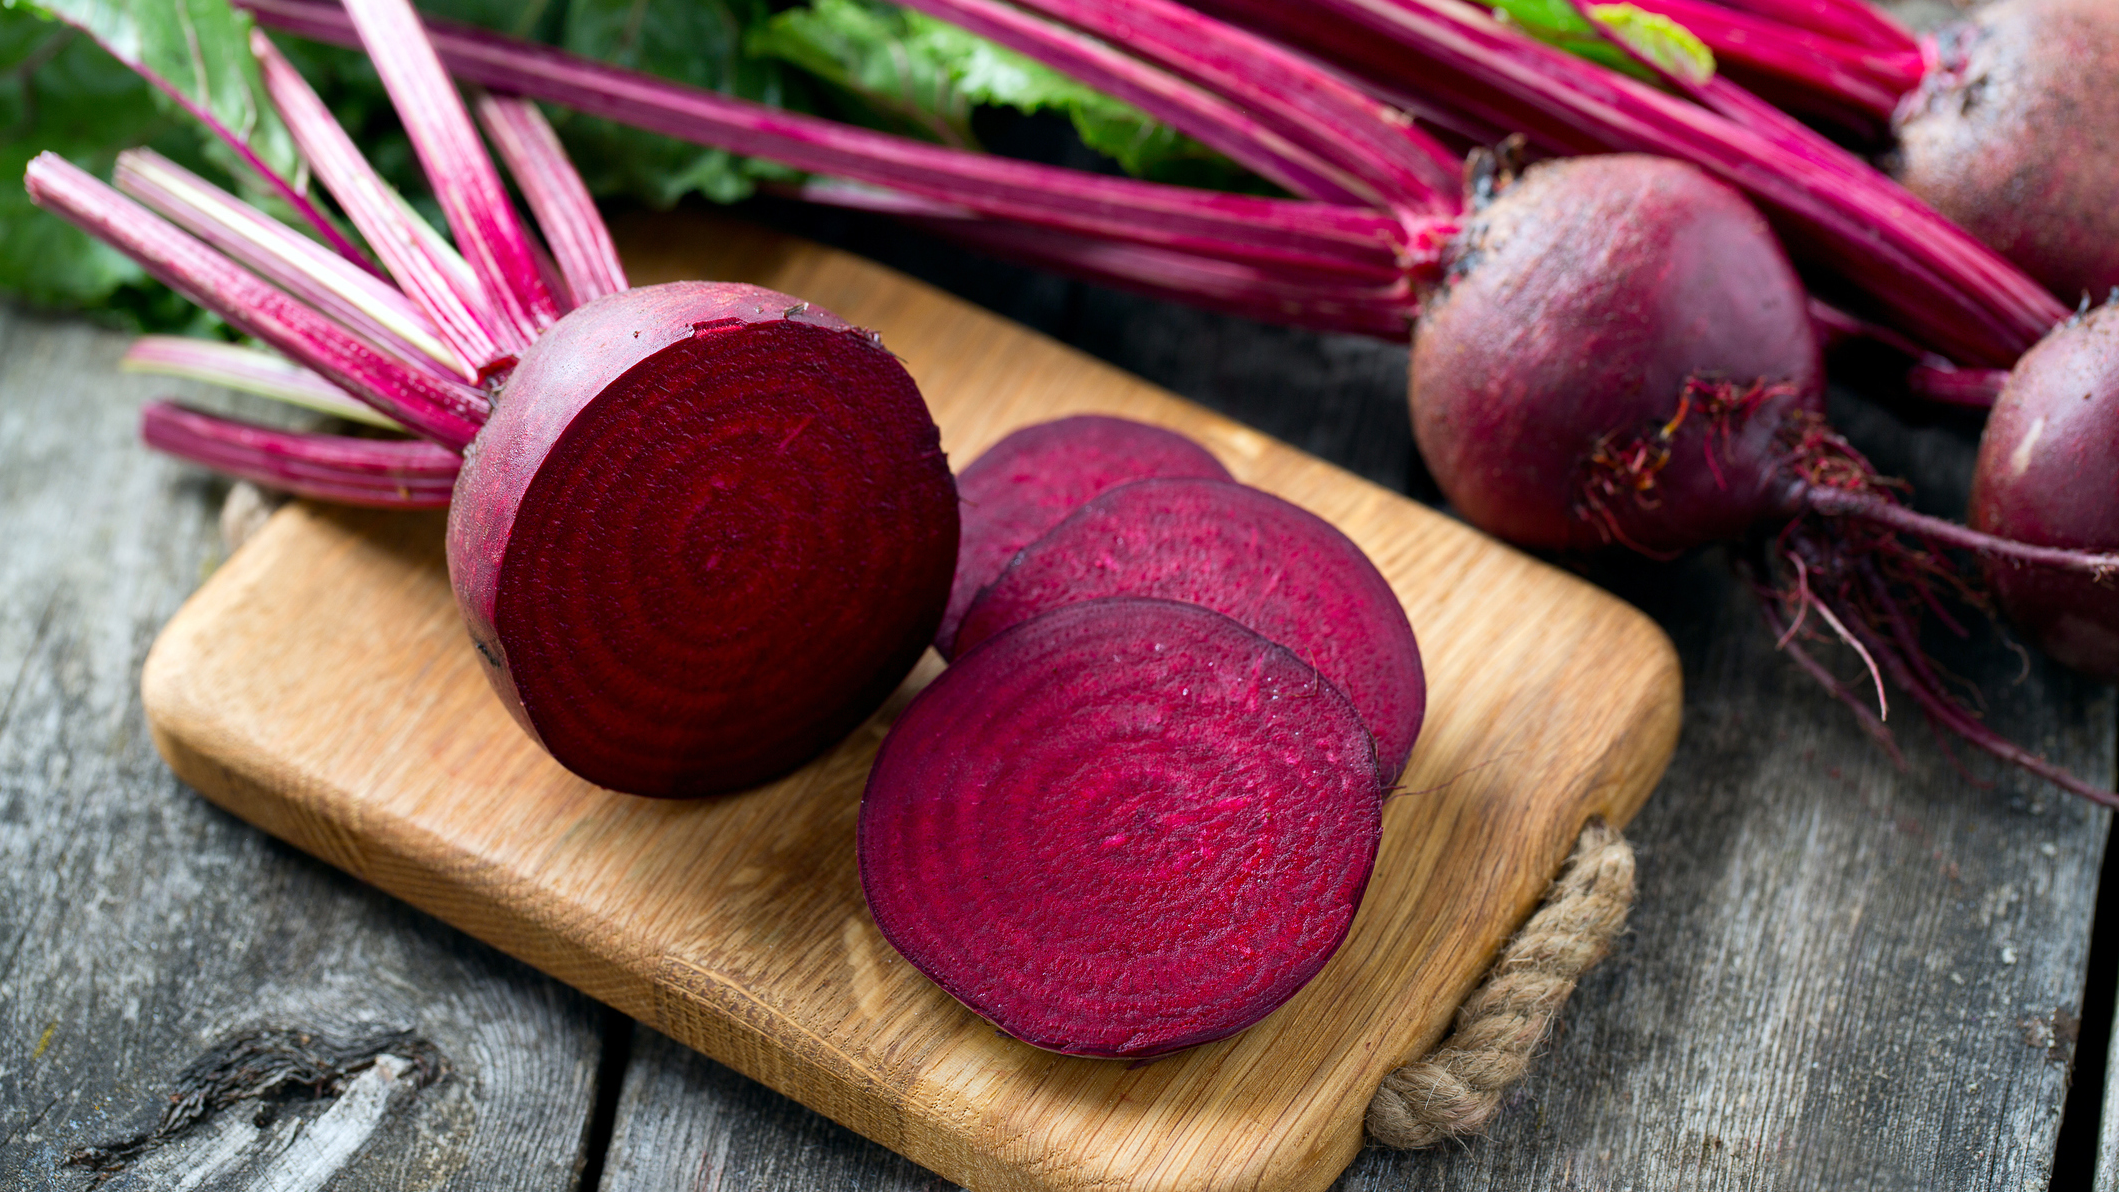  Beetroot, scientifically known as Beta vulgaris, is a vibrant and nutritious root vegetable that has gained popularity for its earthy flavor